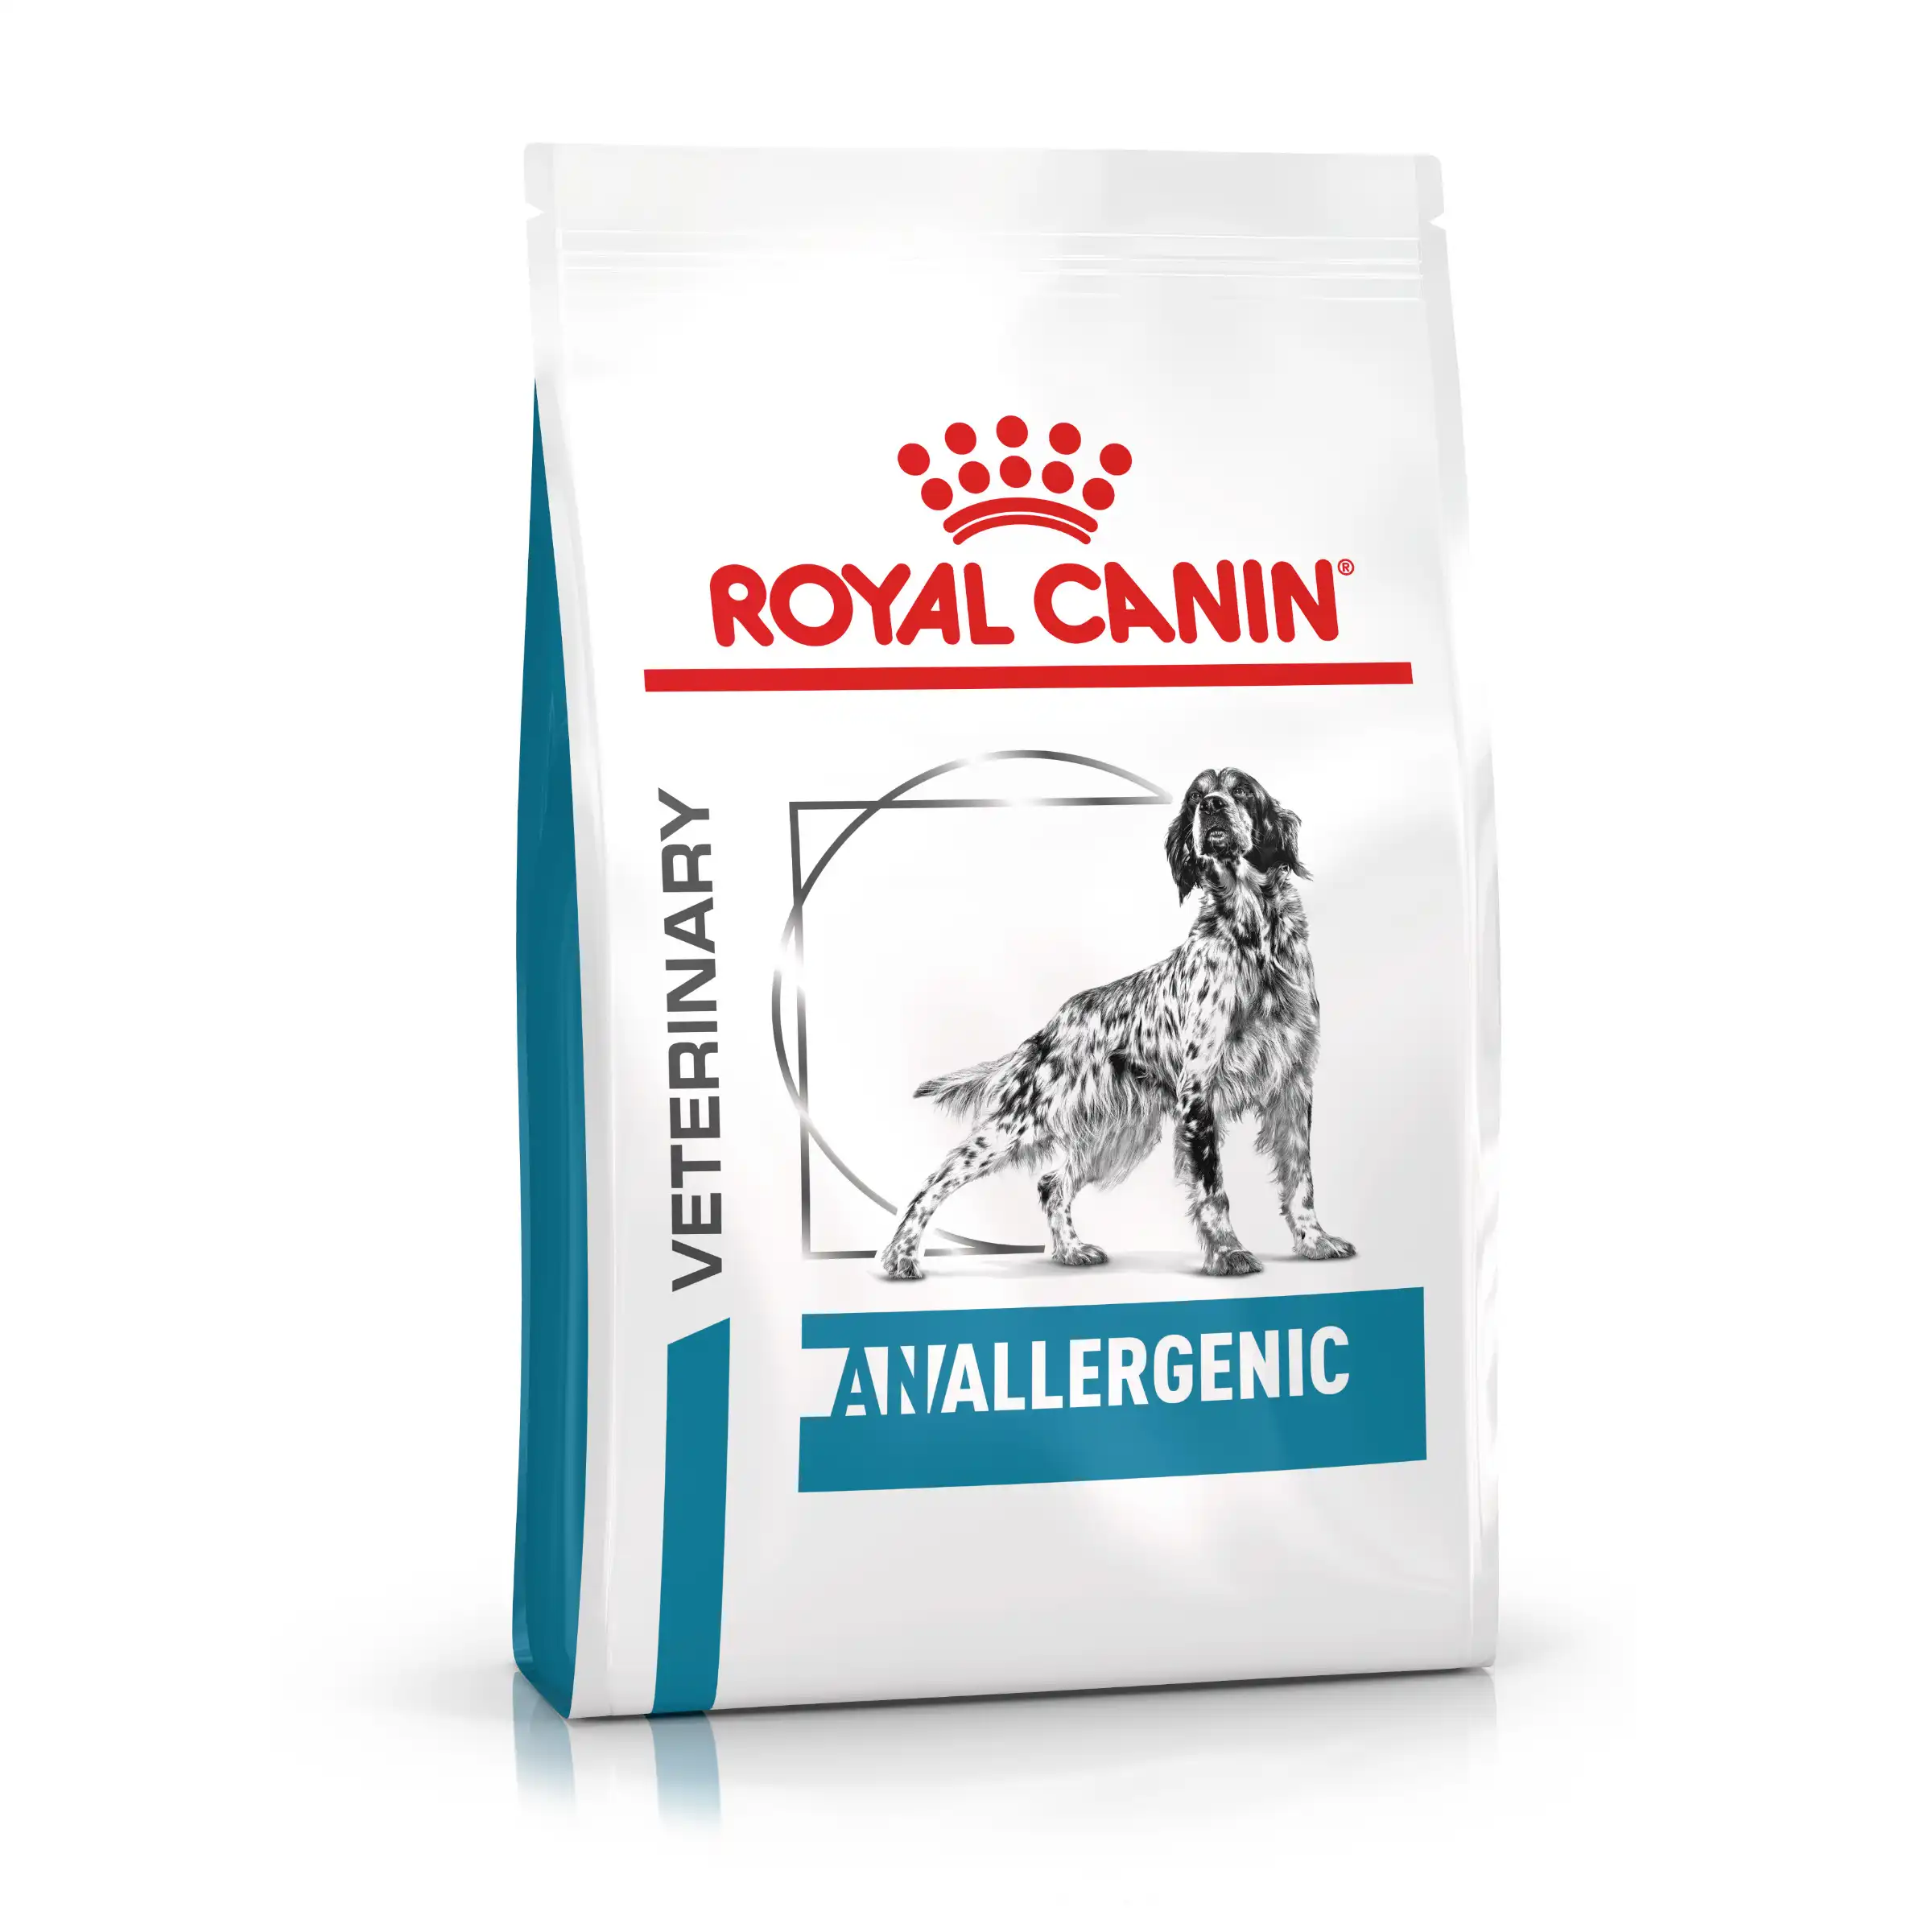 Royal Canin Veterinary Canine Anallergenic pienso para perros - 3 kg